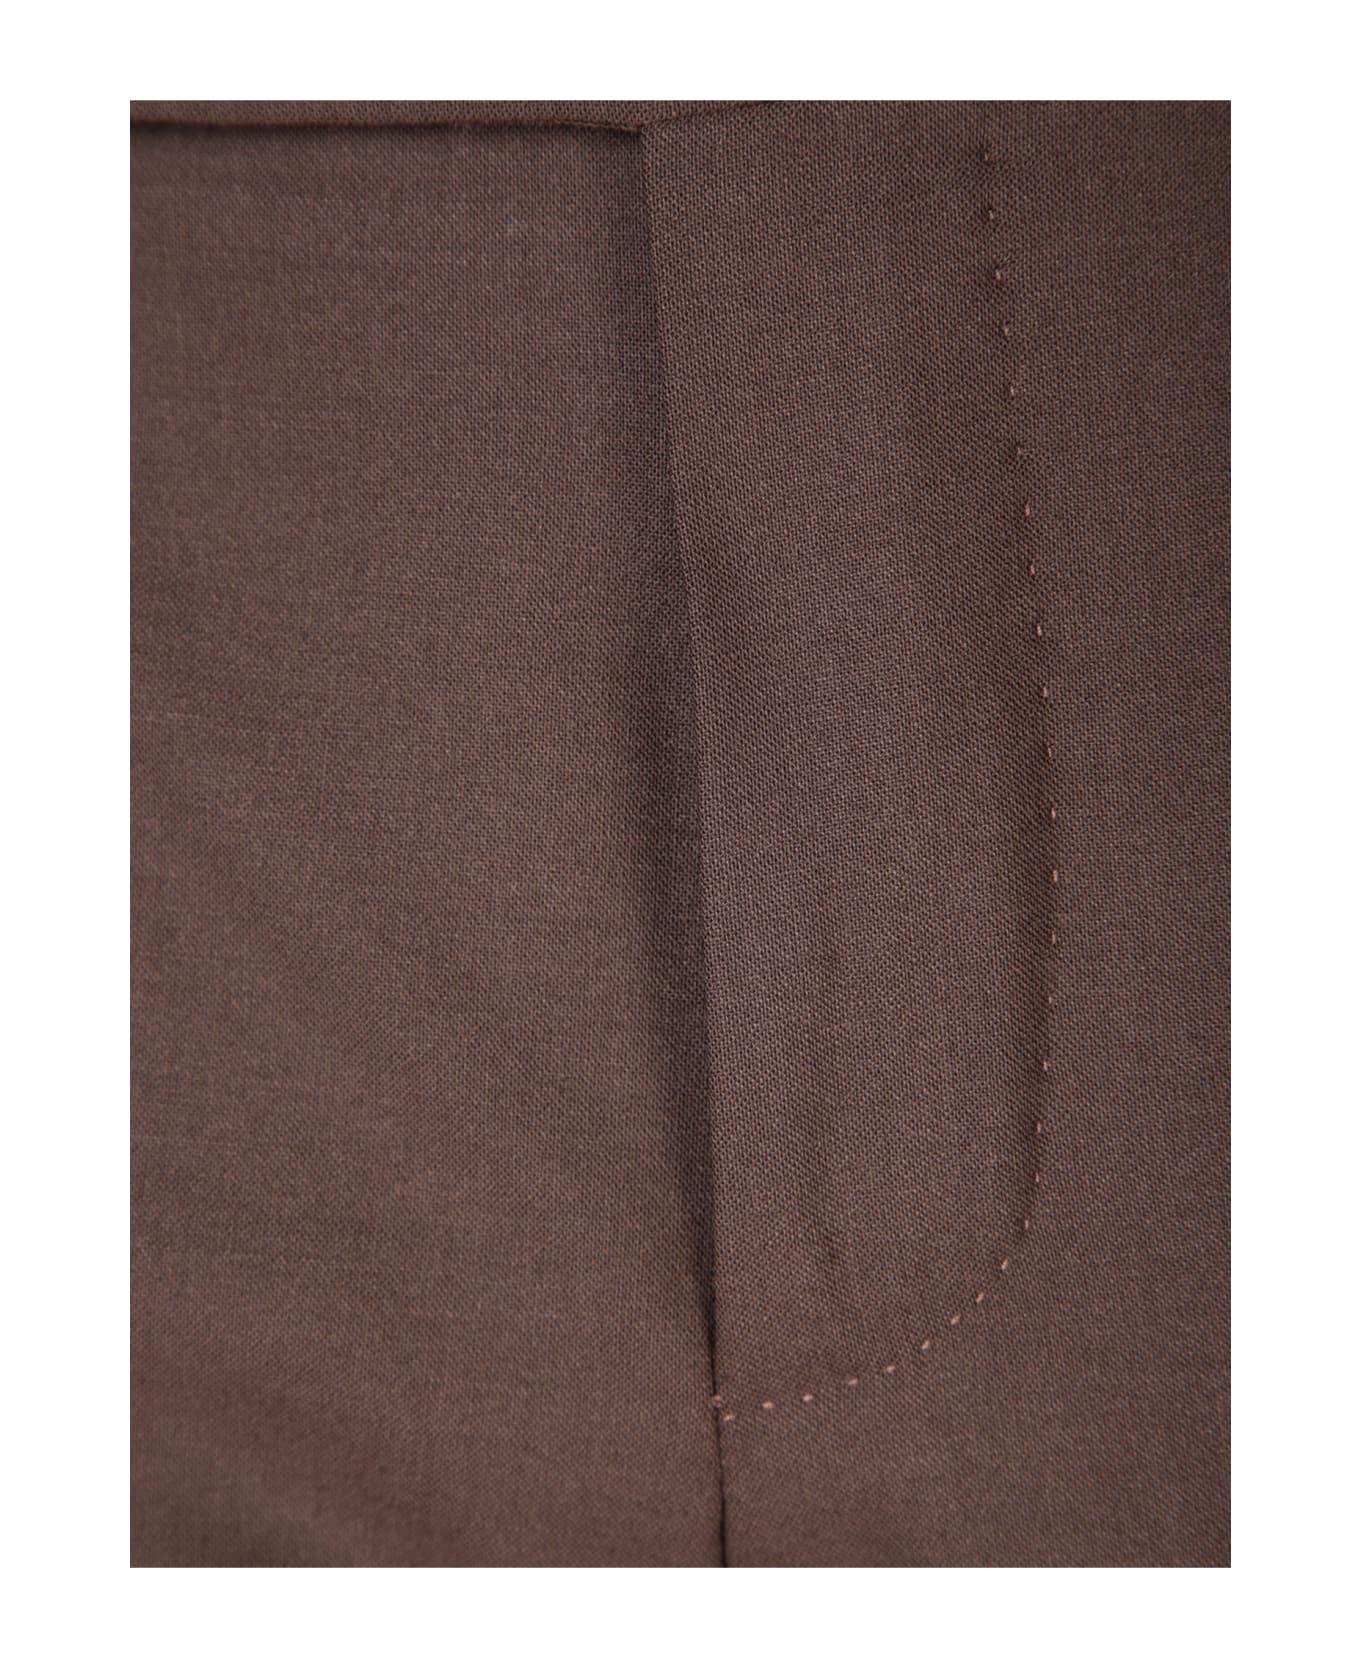 PT Torino Dieci Brown Trousers - Brown ボトムス